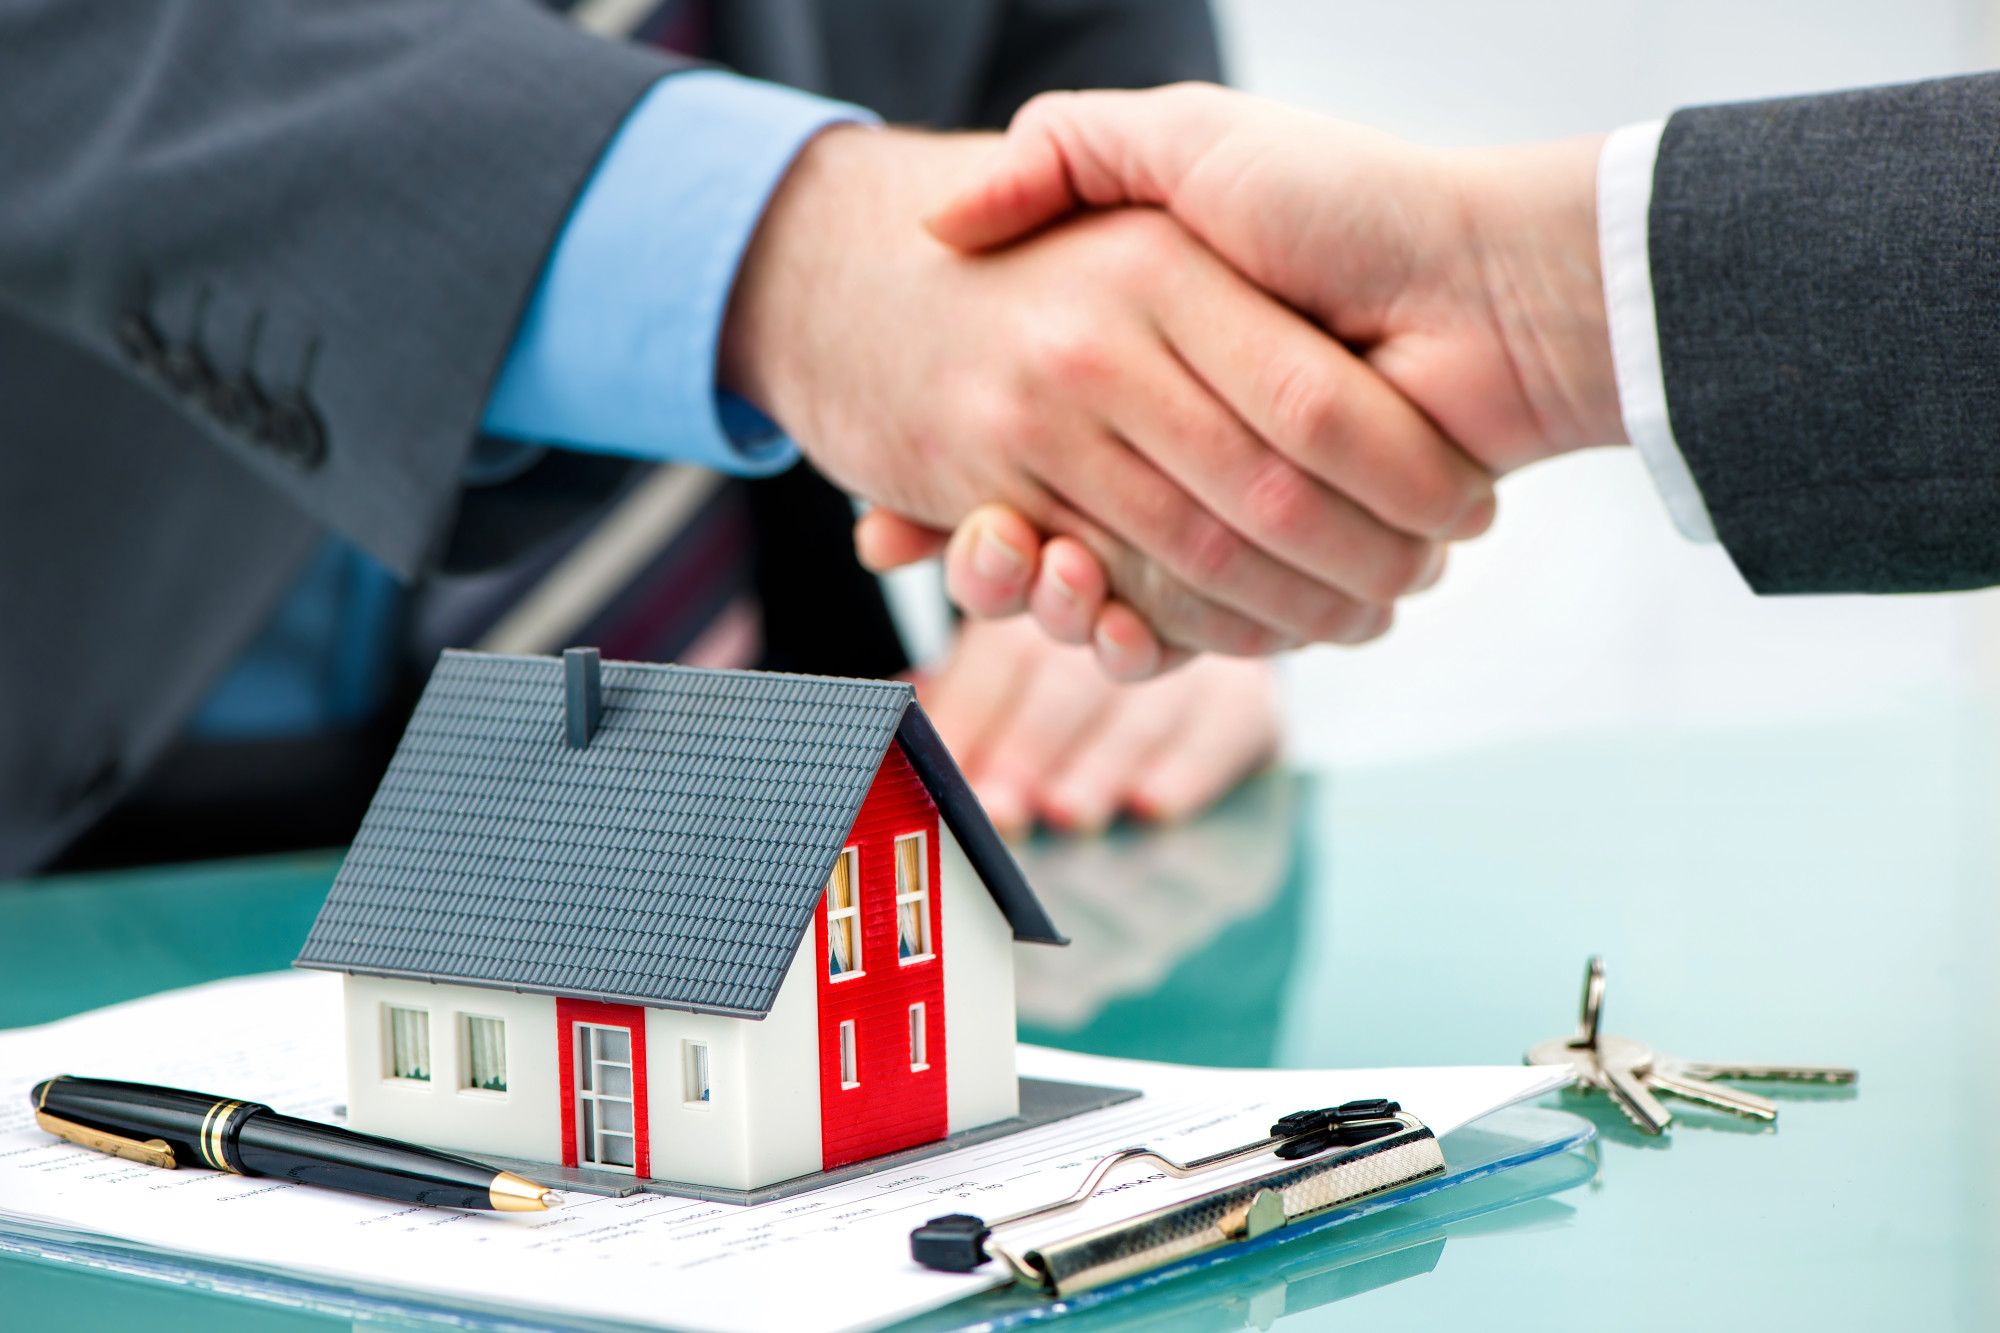 5 Reasons to Outsource Houston Property Management